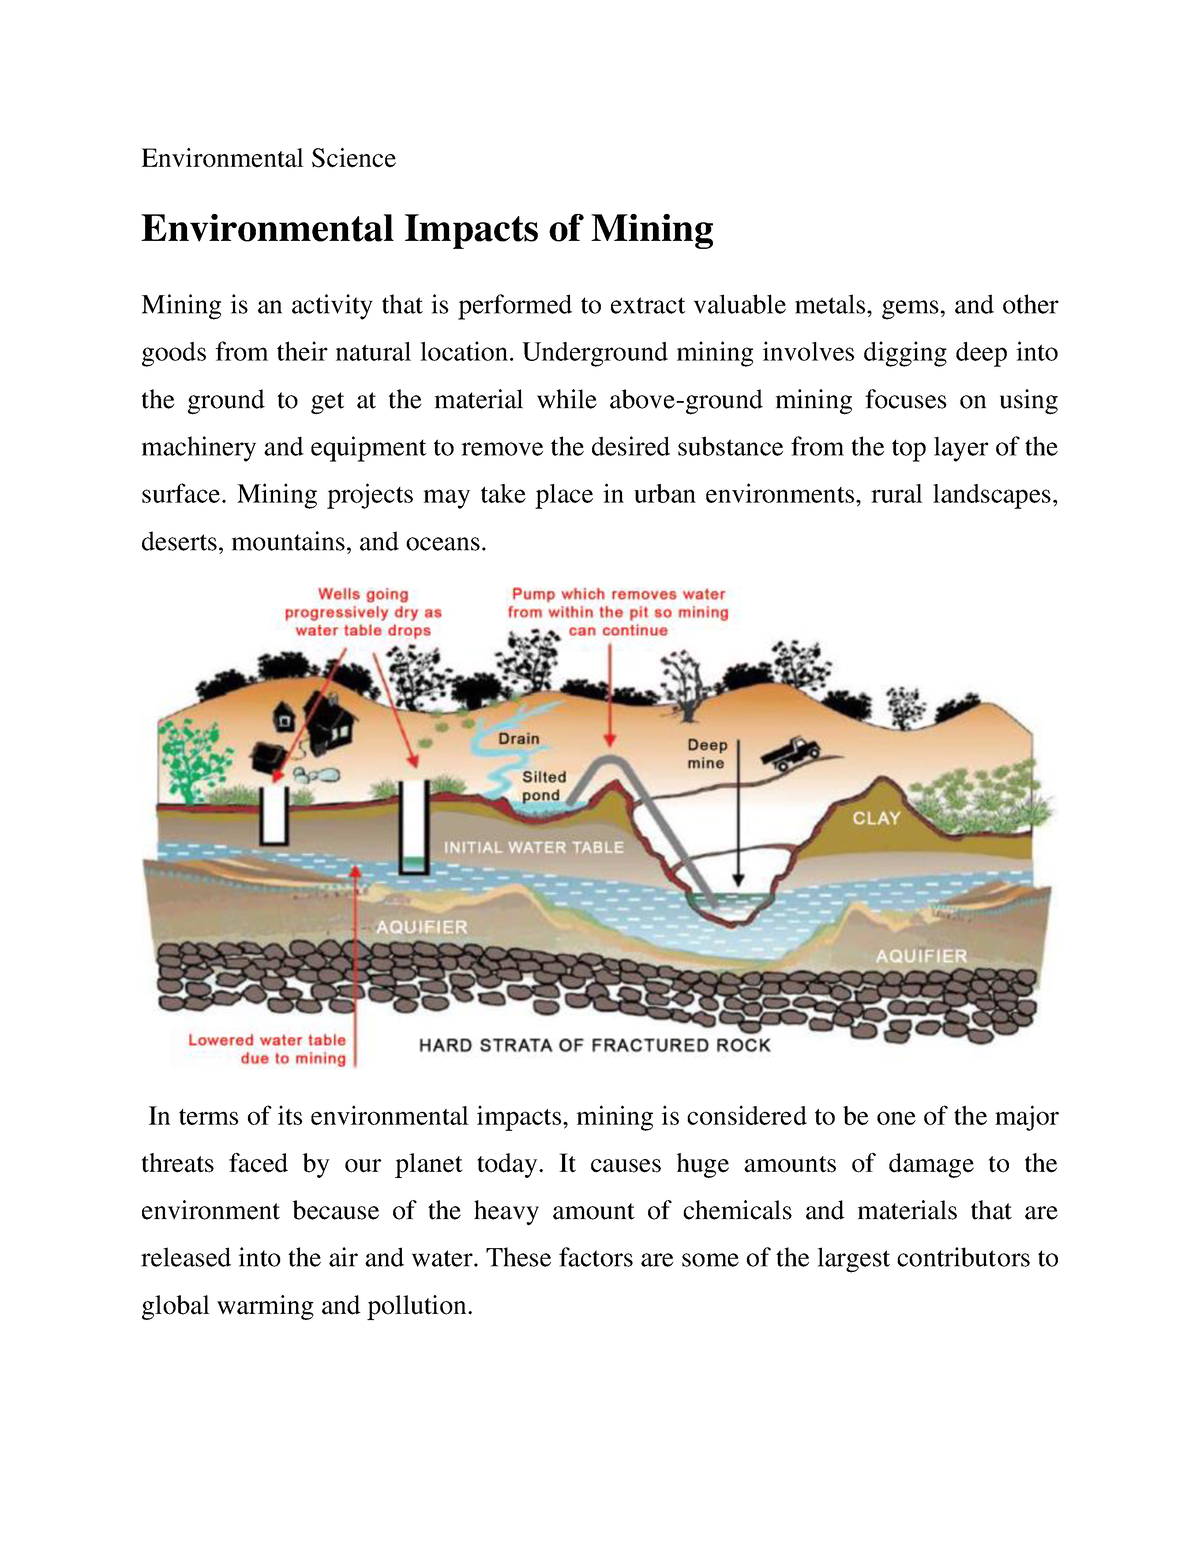 essay about mining and environment